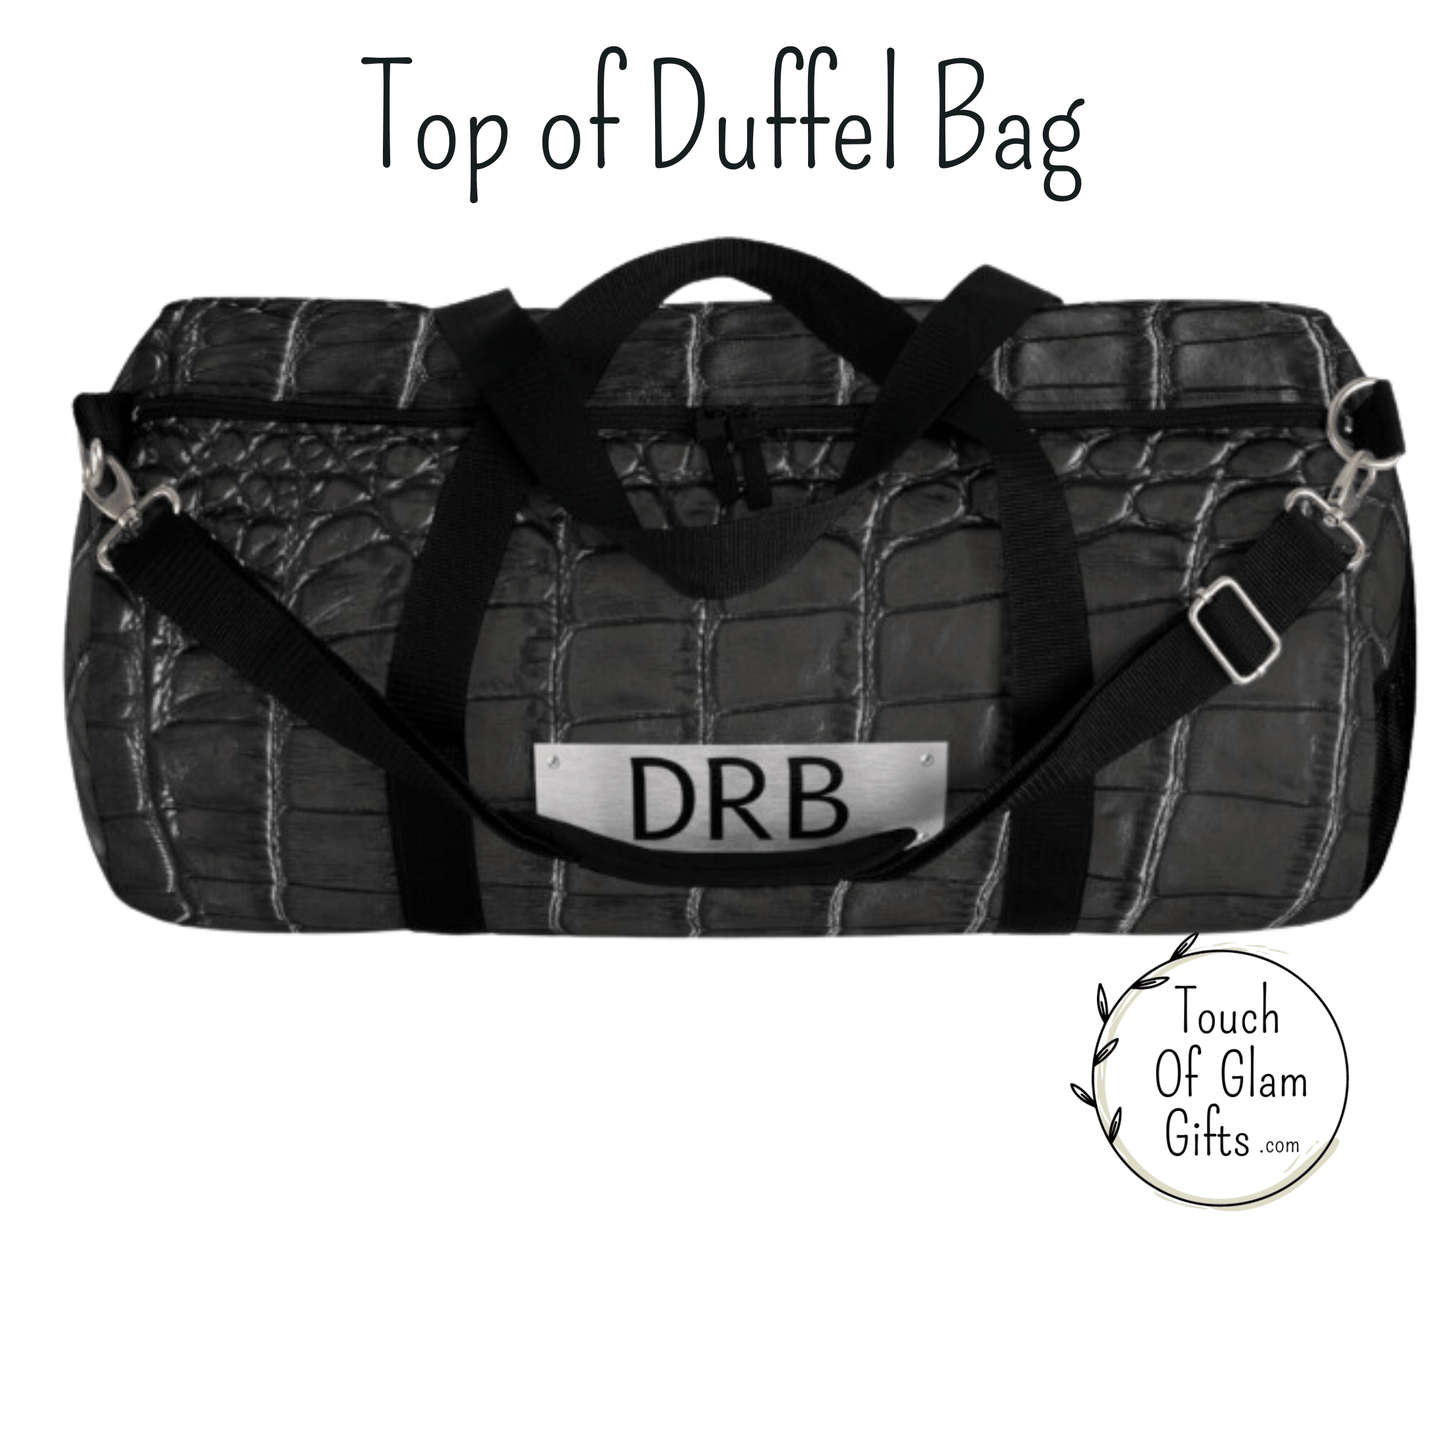 The top view of the black snakeskin duffel bag shows a quality zipper with two zipper heads for convenience.